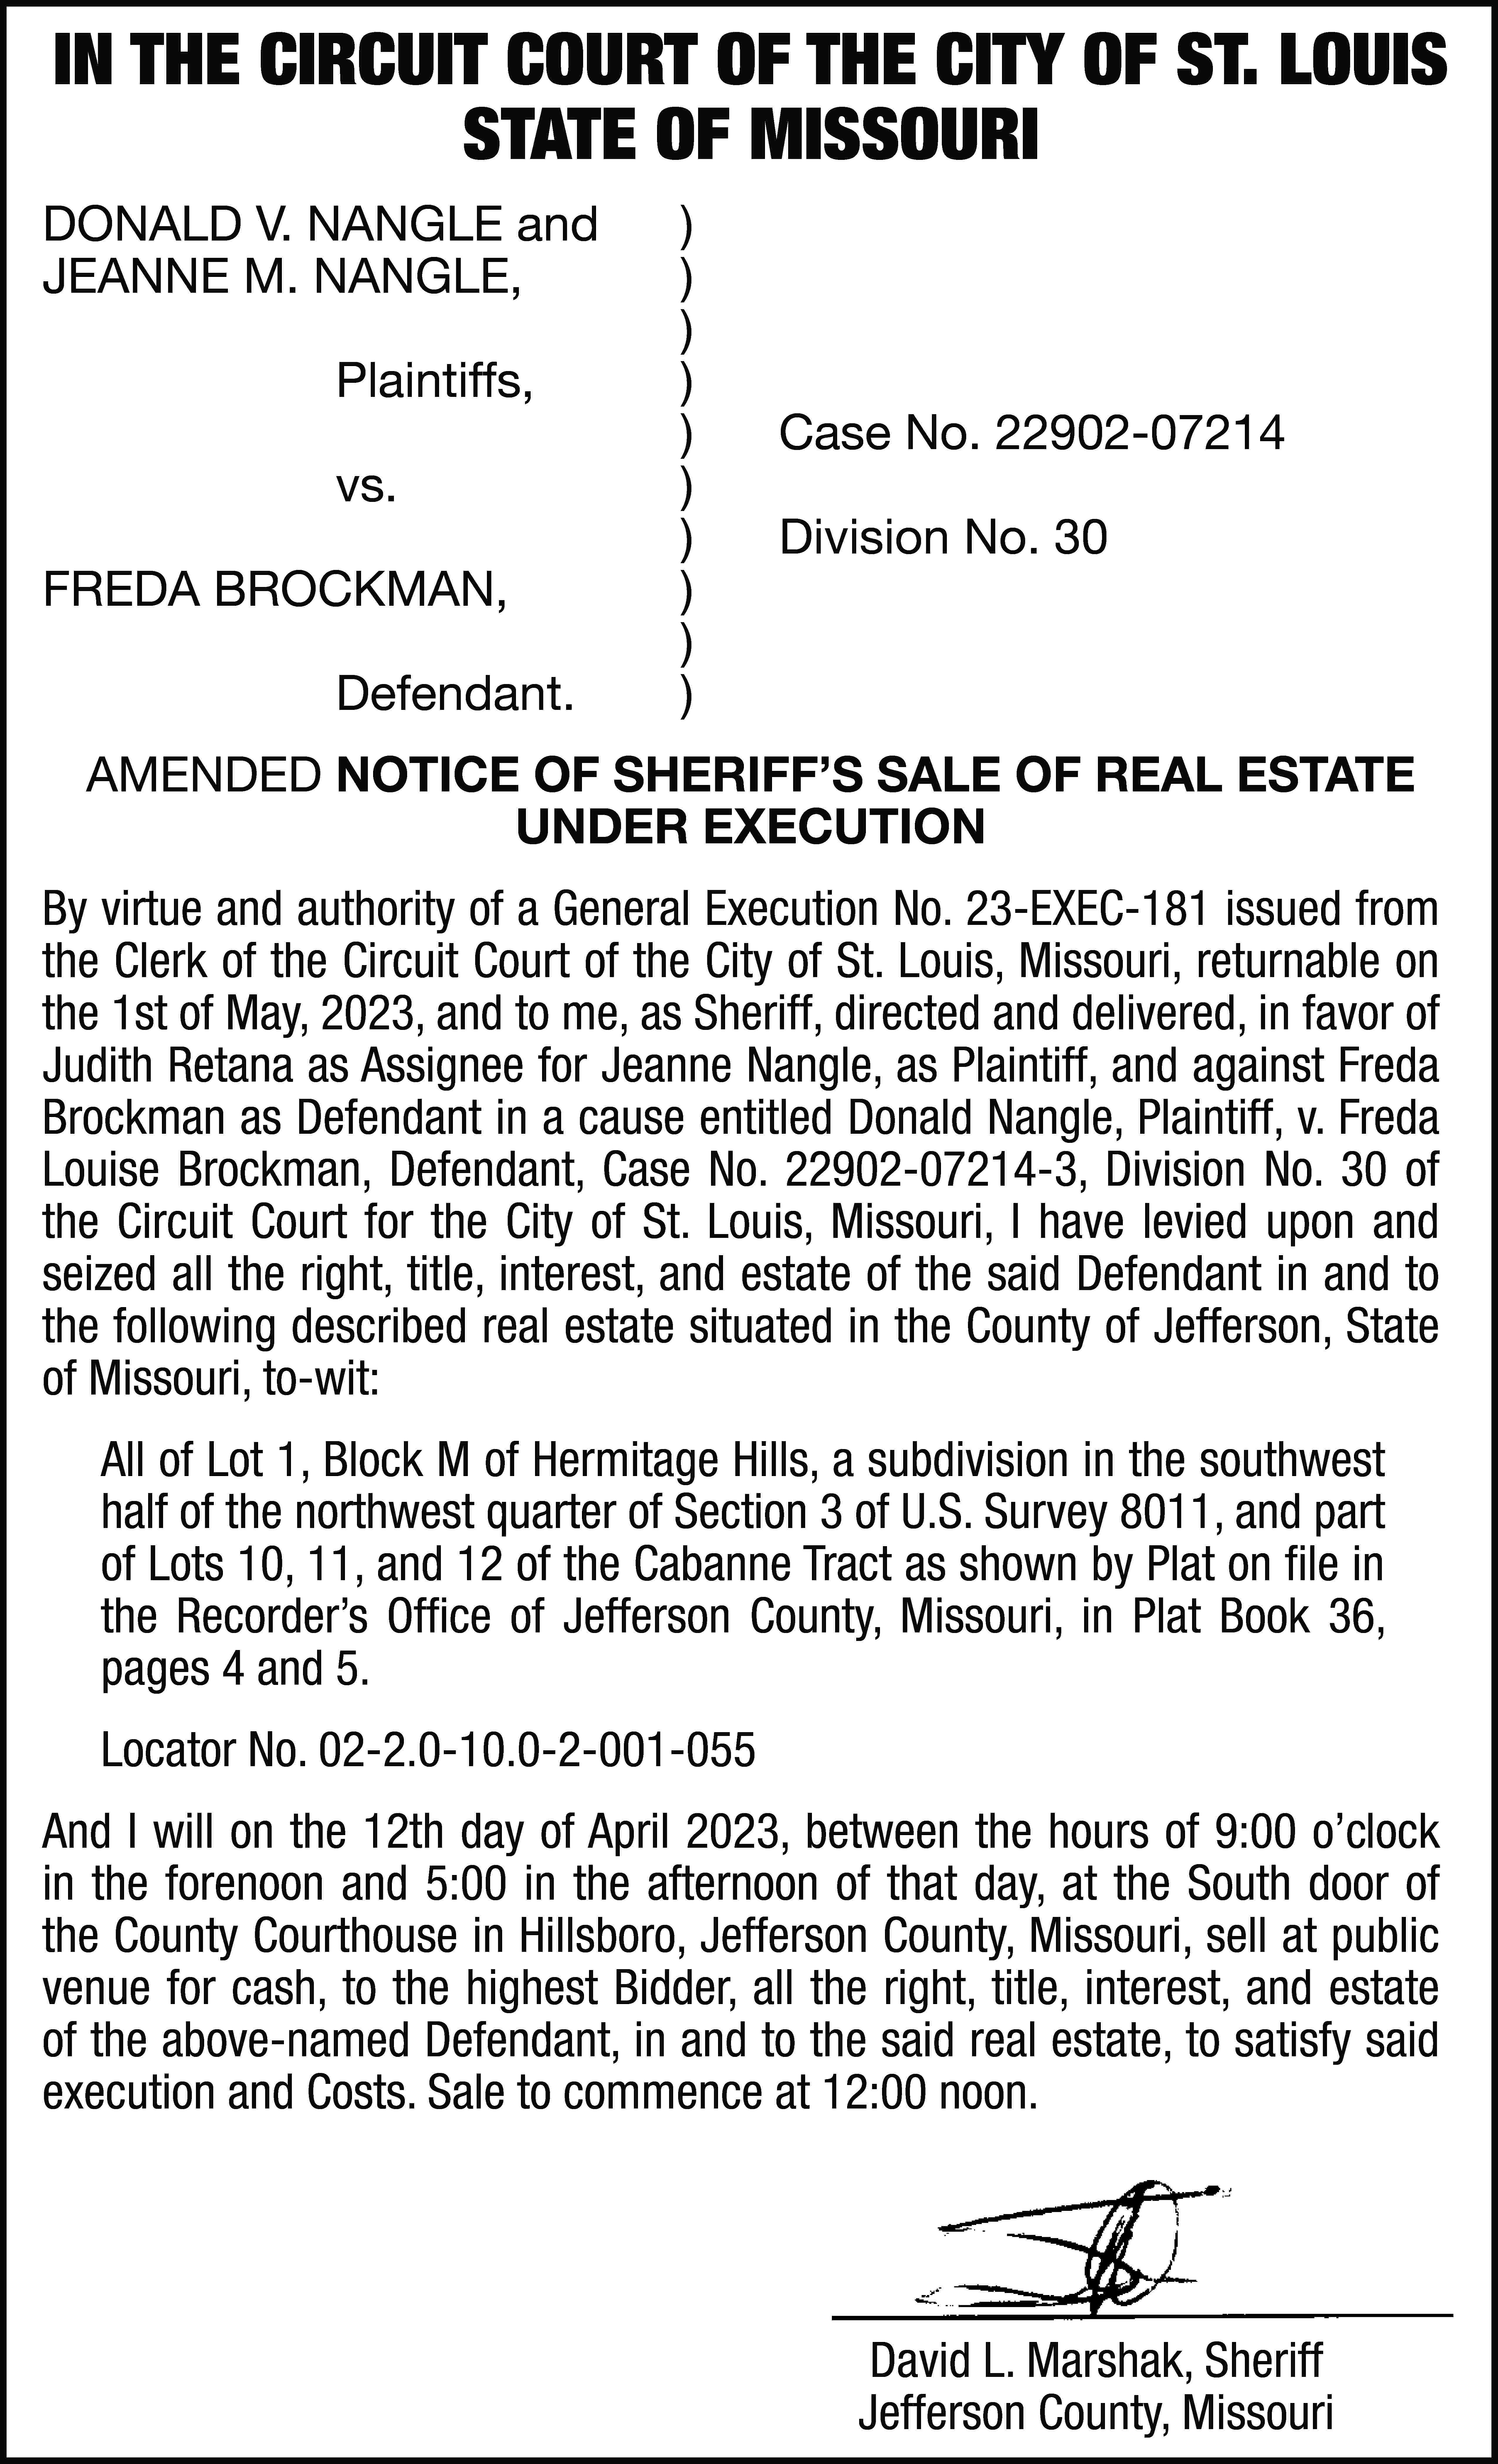 IN THE CIRCUIT COURT OF  IN THE CIRCUIT COURT OF THE CITY OF ST. LOUIS STATE OF MISSOURI DONALD V. NANGLE and JEANNE M. NANGLE, Plaintiffs, vs. FREDA BROCKMAN, Defendant. ) ) ) ) ) ) ) ) ) ) Case No. 22902-07214 Division No. 30 AMENDED NOTICE OF SHERIFF’S SALE OF REAL ESTATE UNDER EXECUTION By virtue and authority of a General Execution No. 23-EXEC-181 issued from the Clerk of the Circuit Court of the City of St. Louis, Missouri, returnable on the 1st of May, 2023, and to me, as Sheriff, directed and delivered, in favor of Judith Retana as Assignee for Jeanne Nangle, as Plaintiff, and against Freda Brockman as Defendant in a cause entitled Donald Nangle, Plaintiff, v. Freda Louise Brockman, Defendant, Case No. 22902-07214-3, Division No. 30 of the Circuit Court for the City of St. Louis, Missouri, I have levied upon and seized all the right, title, interest, and estate of the said Defendant in and to the following described real estate situated in the County of Jefferson, State of Missouri, to-wit: All of Lot 1, Block M of Hermitage Hills, a subdivision in the southwest half of the northwest quarter of Section 3 of U.S. Survey 8011, and part of Lots 10, 11, and 12 of the Cabanne Tract as shown by Plat on file in the Recorder’s Office of Jefferson County, Missouri, in Plat Book 36, pages 4 and 5. Locator No. 02-2.0-10.0-2-001-055 And I will on the 12th day of April 2023, between the hours of 9:00 o’clock in the forenoon and 5:00 in the afternoon of that day, at the South door of the County Courthouse in Hillsboro, Jefferson County, Missouri, sell at public venue for cash, to the highest Bidder, all the right, title, interest, and estate of the above-named Defendant, in and to the said real estate, to satisfy said execution and Costs. Sale to commence at 12:00 noon. David L. Marshak, Sheriff Jefferson County, Missouri